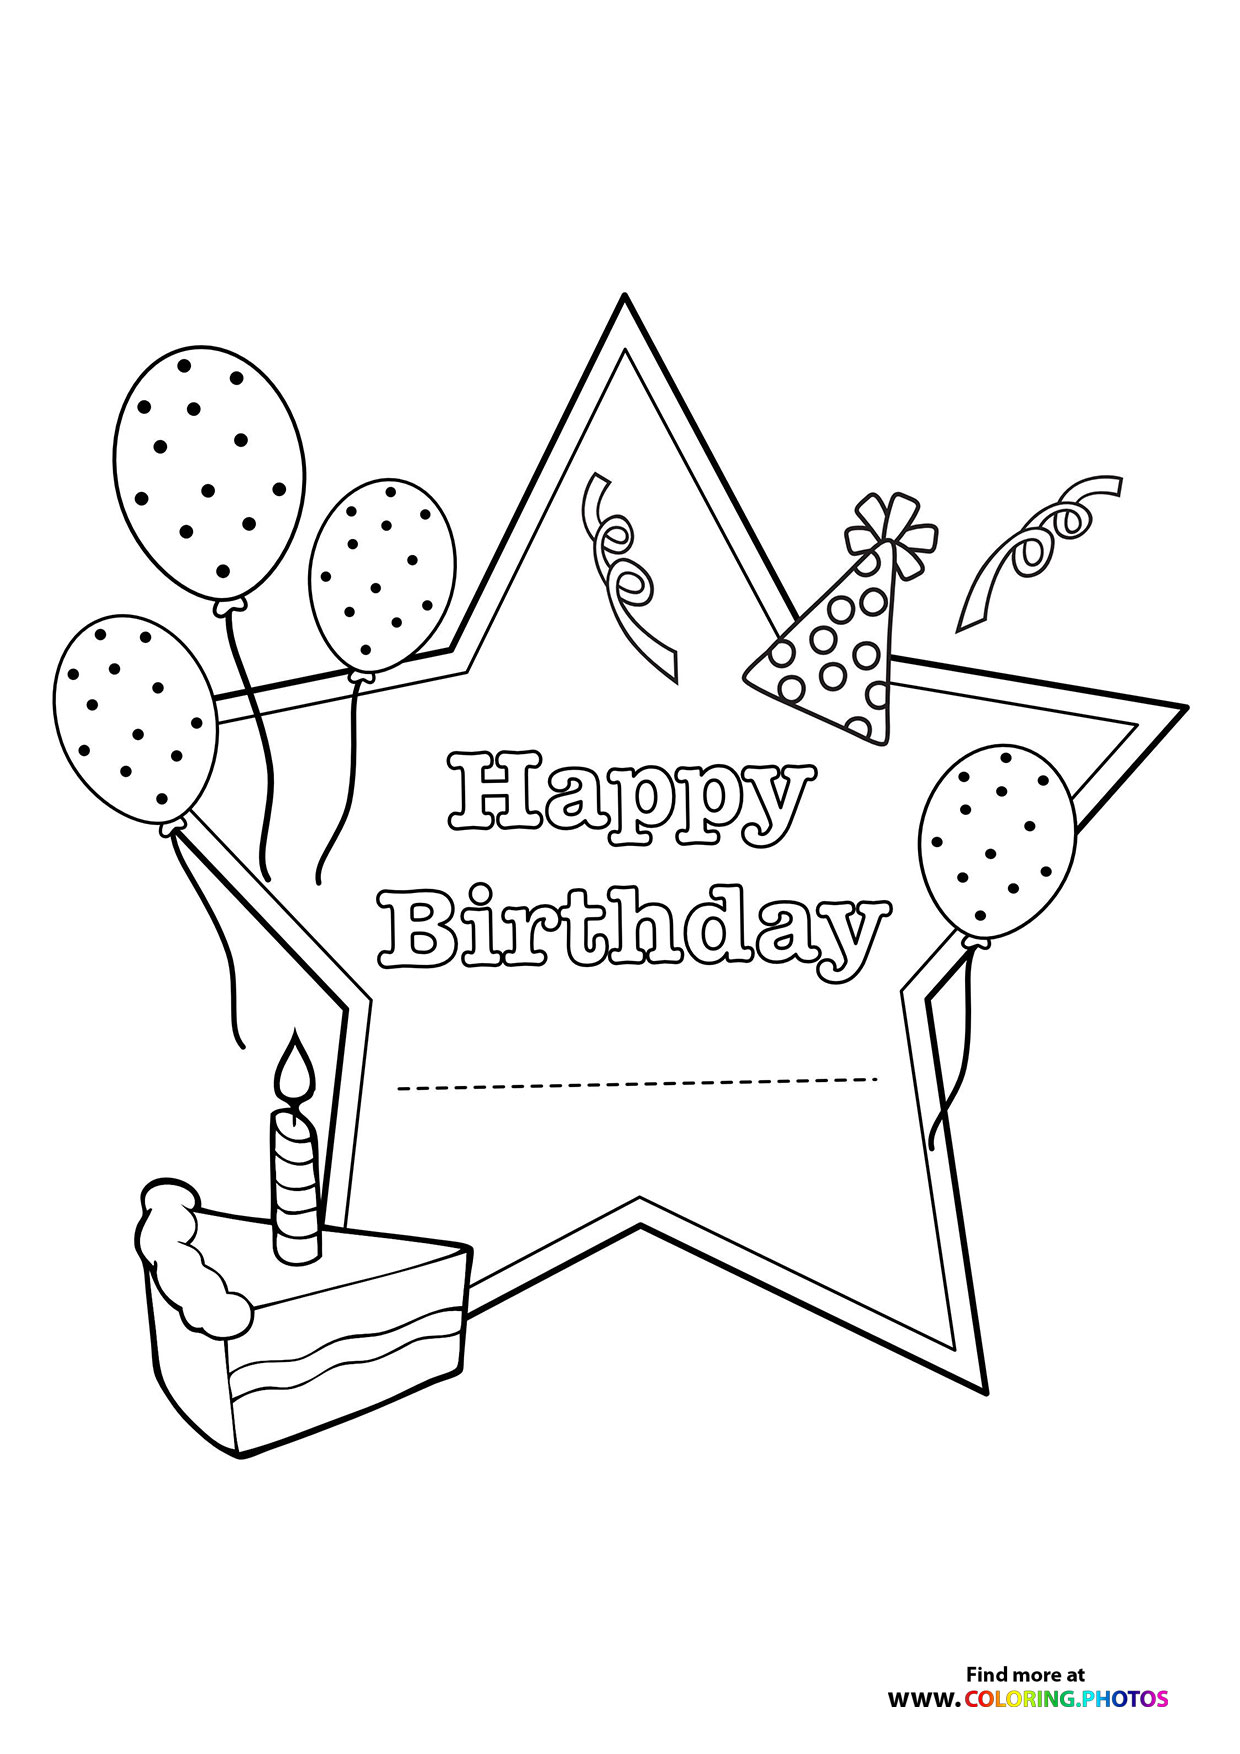 birthday-coloring-pages-printable